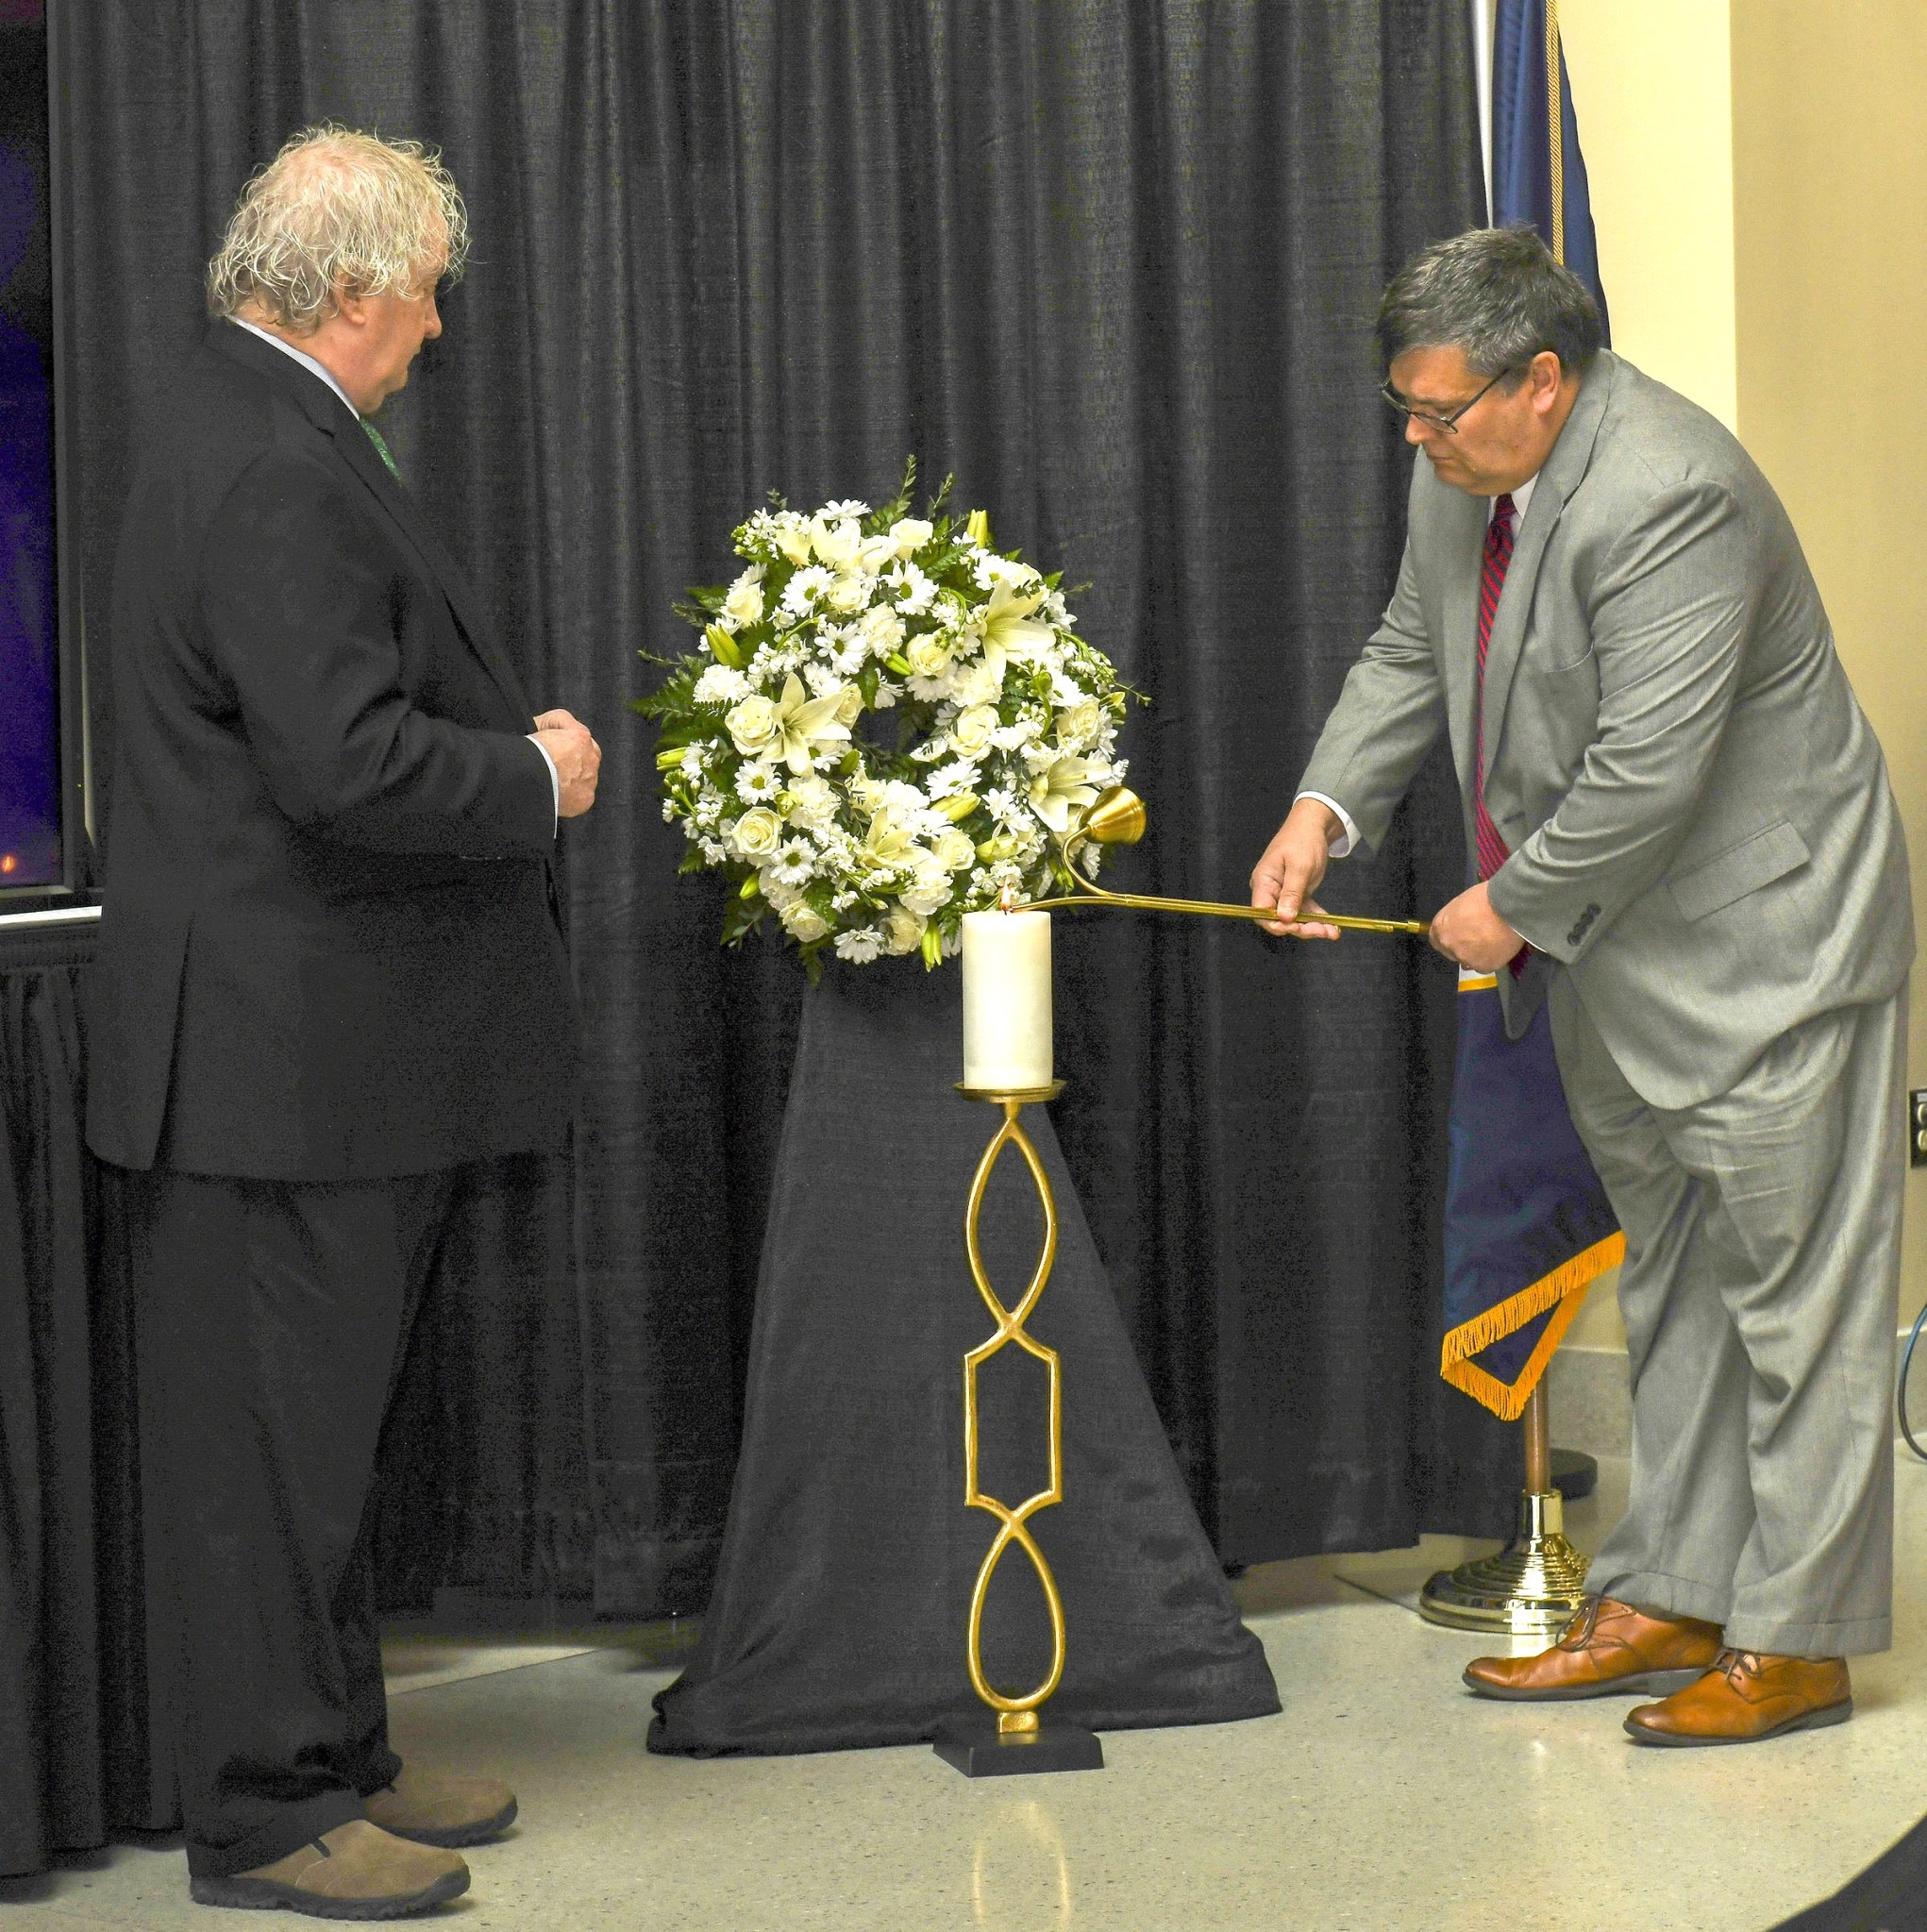 Bill Hill, left, director of Marshall's Safety and Mission Assurance Directorate, observes Larry Leopard, Marshall associate director, technical, lighting a candle in honor of those lost at the Day of Remembrance ceremony.